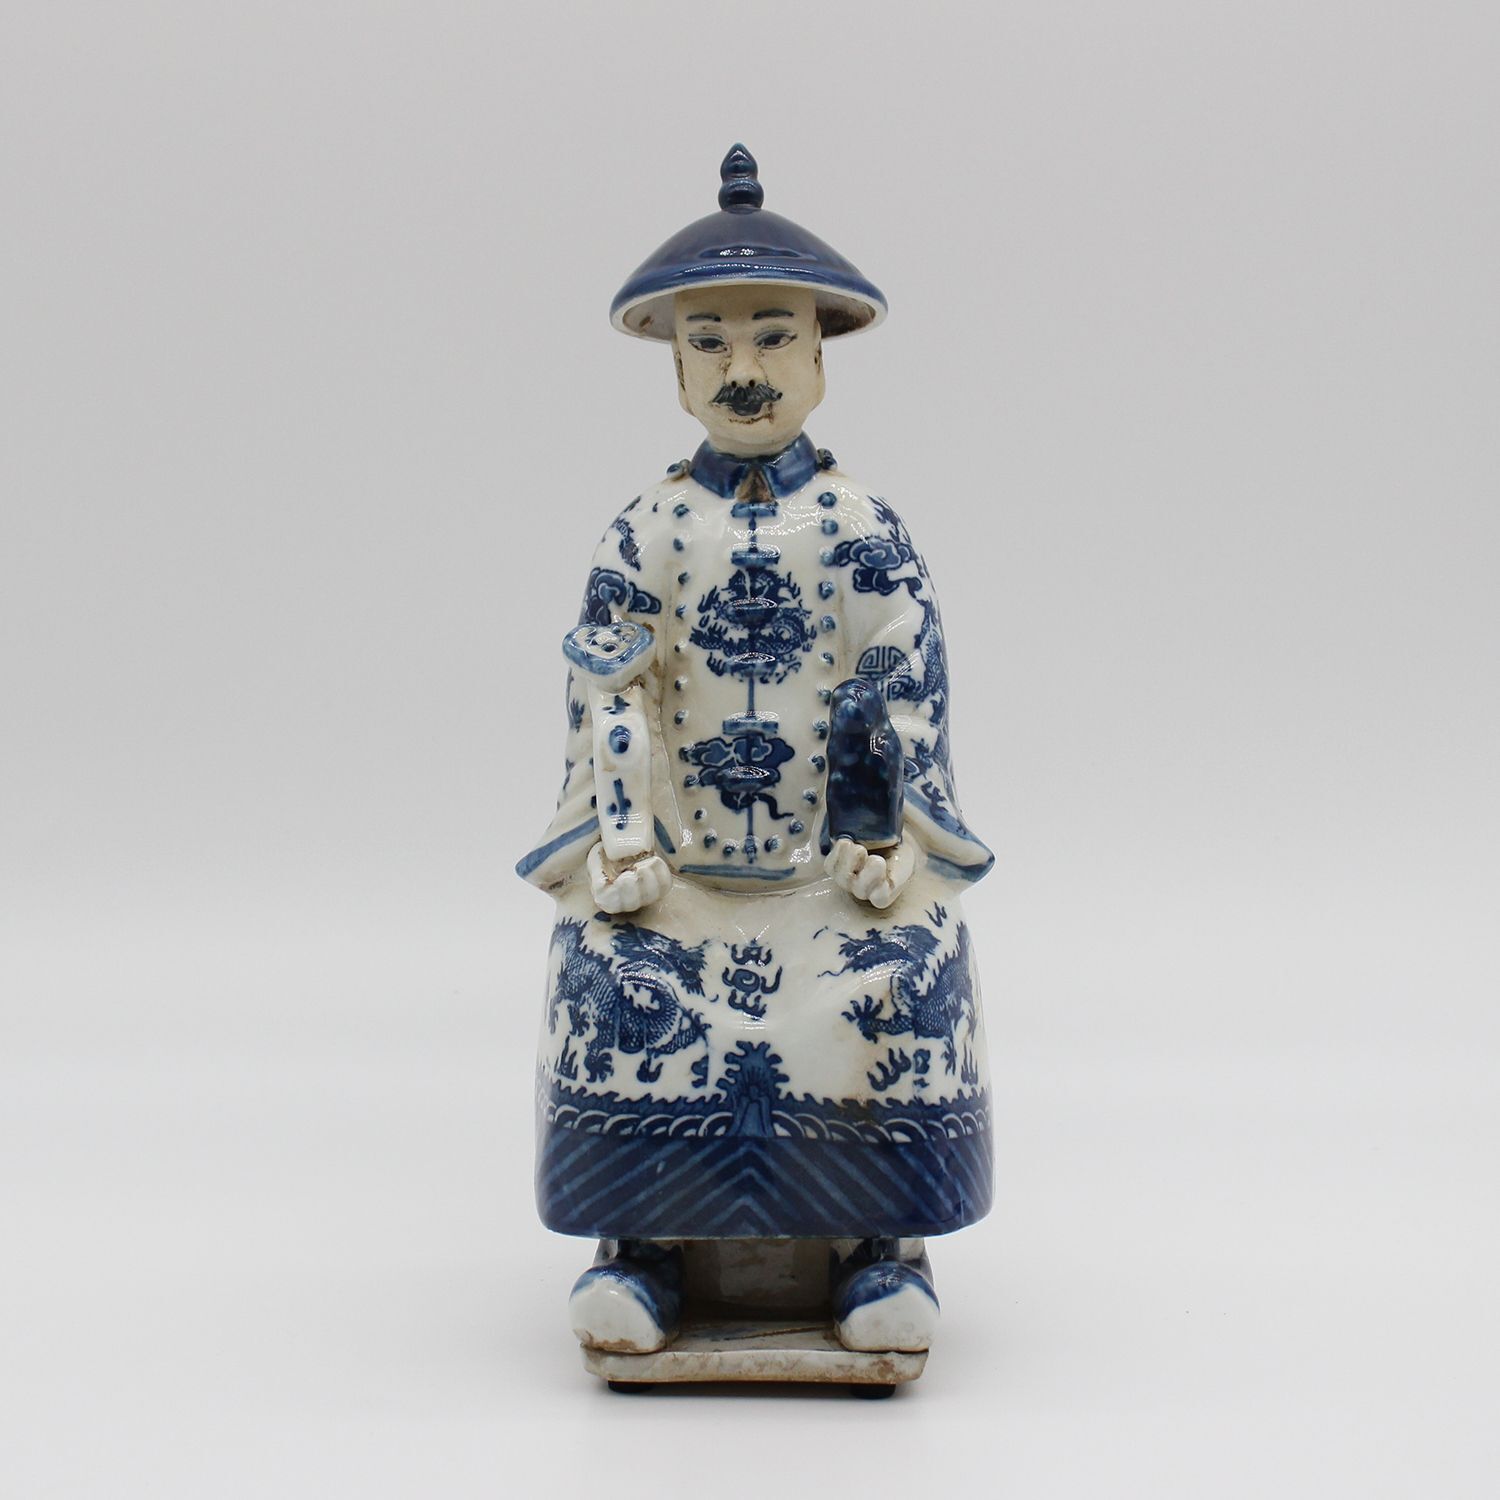 Chinese Qing Dynasty Emperor Figure Statue Figurine Asian Ceramic Emperor’s